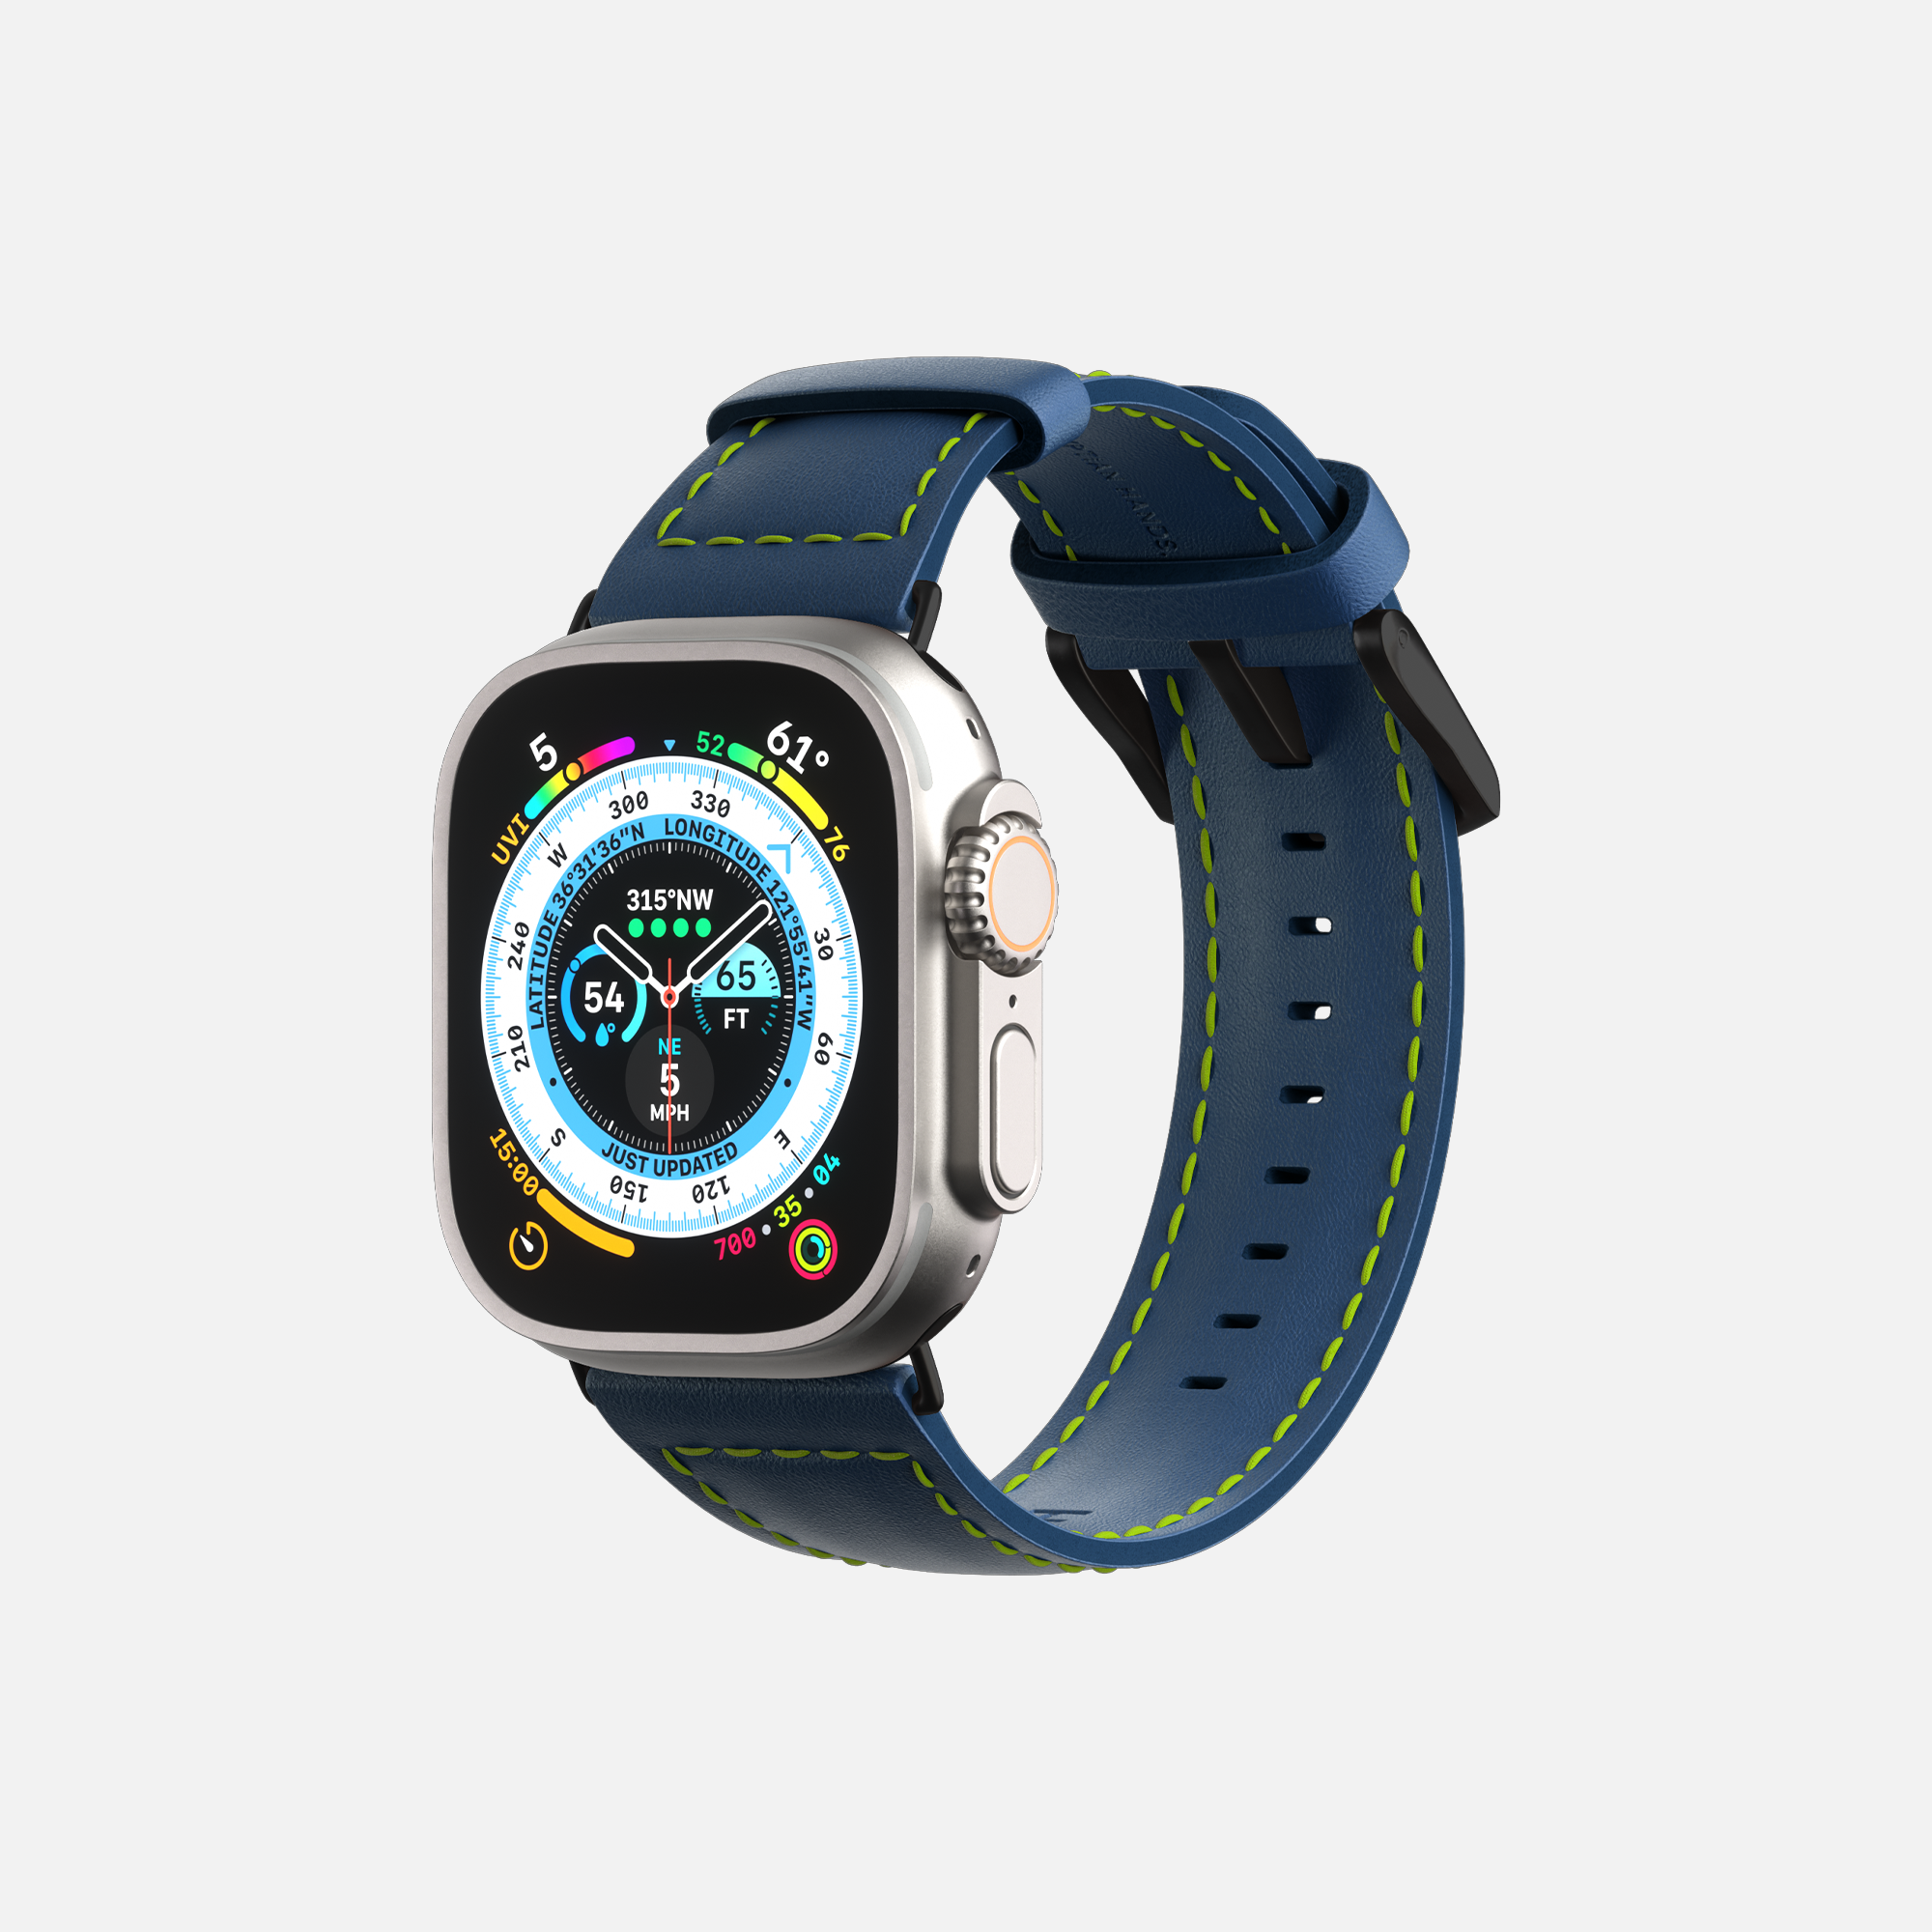 Apple Smartwatch with navigation display and blue strap on a white background.